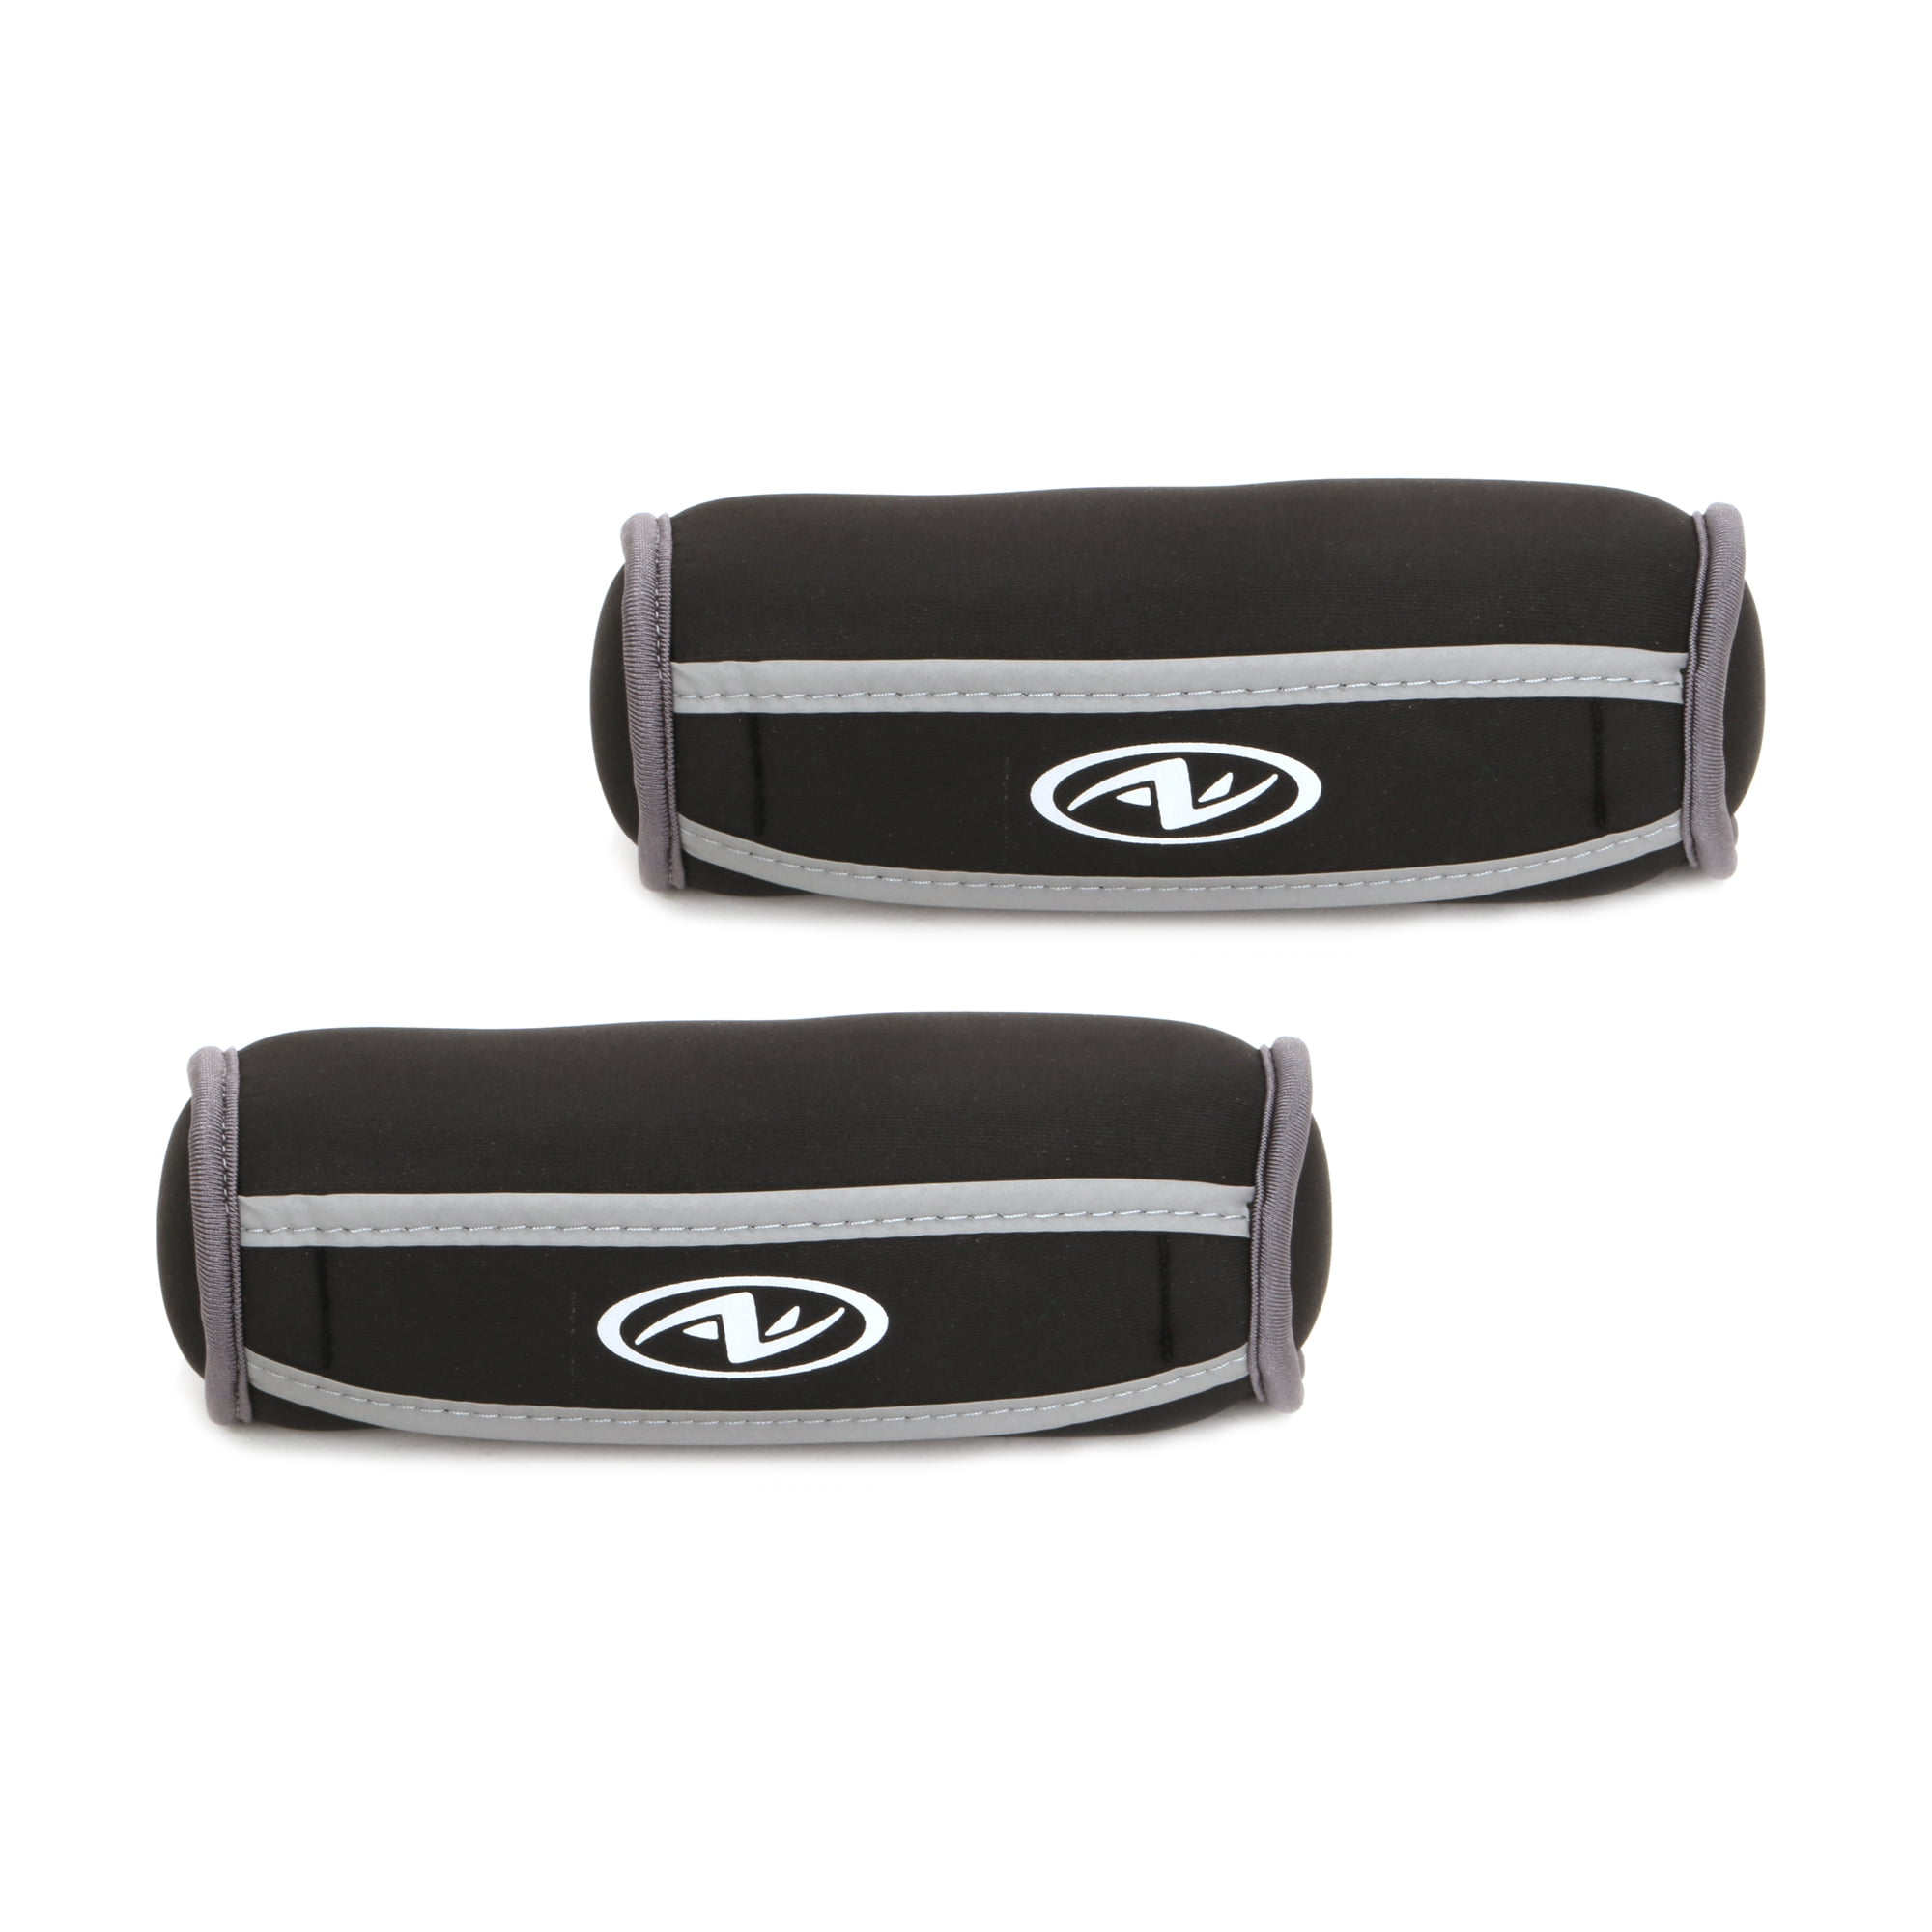 Wellness 2Lb Walking Weights Black for Workout Indoors or Outdoors